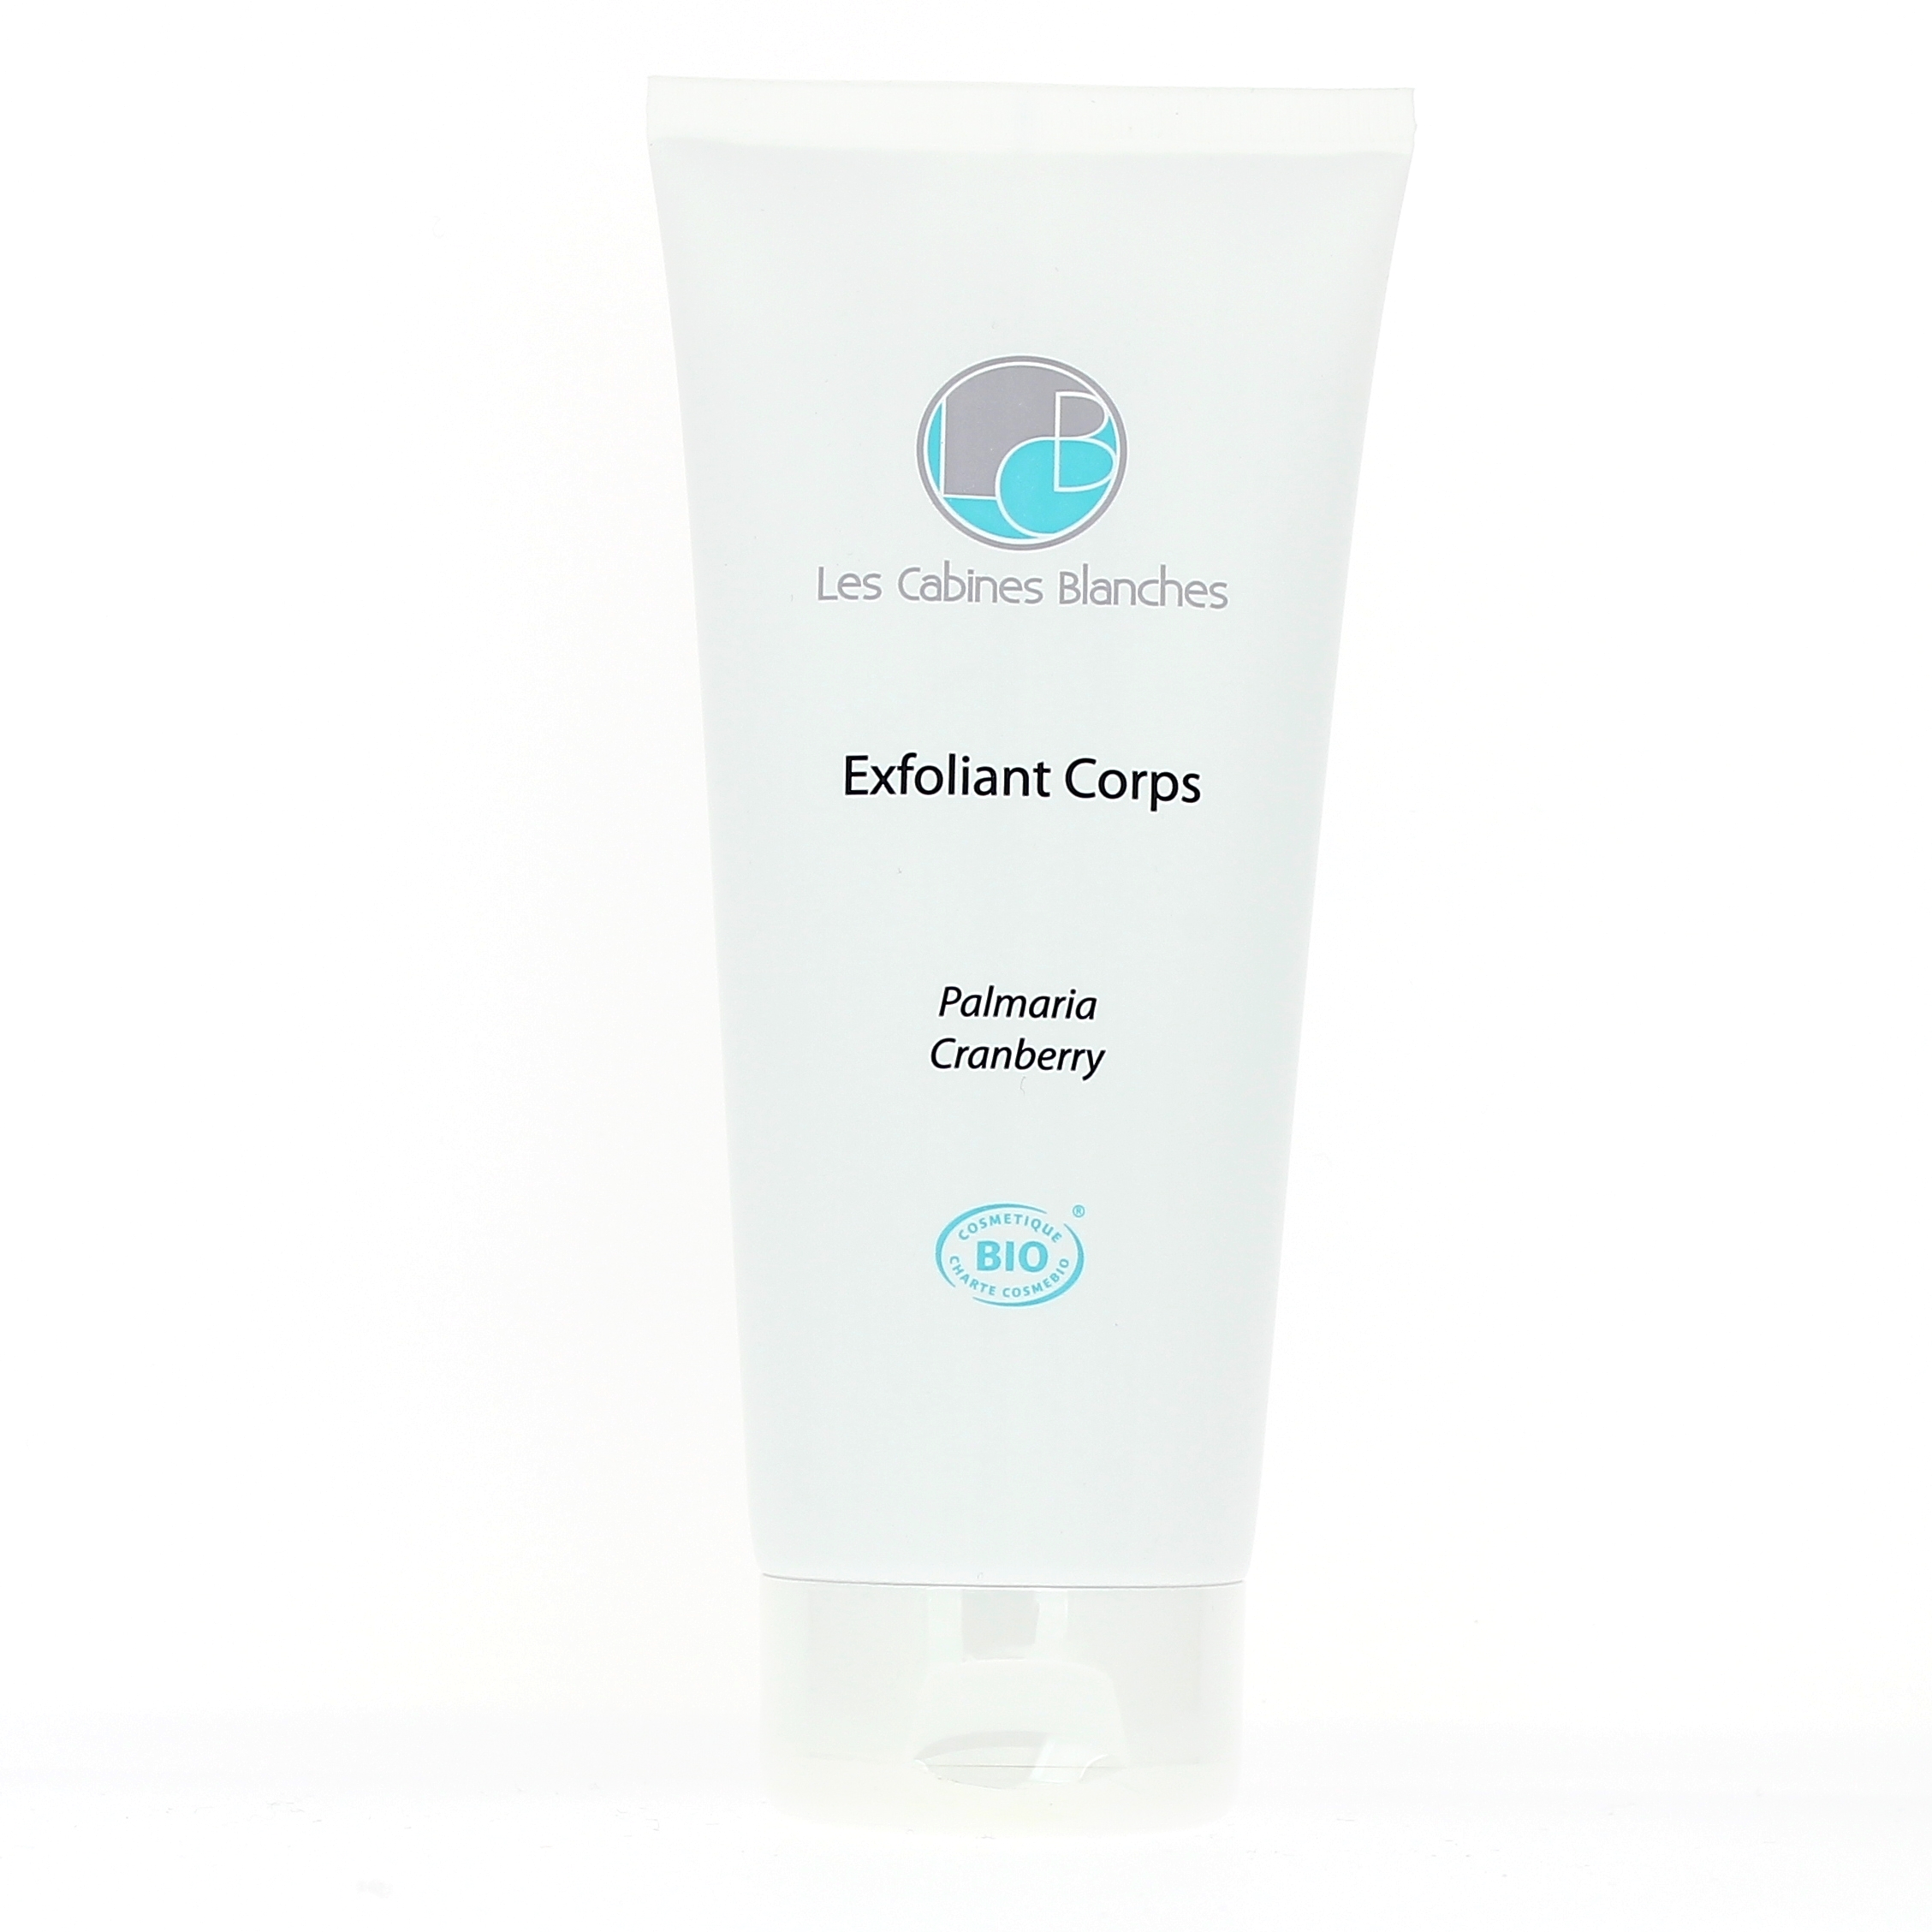 Exfoliant corps - Cabines Blanches